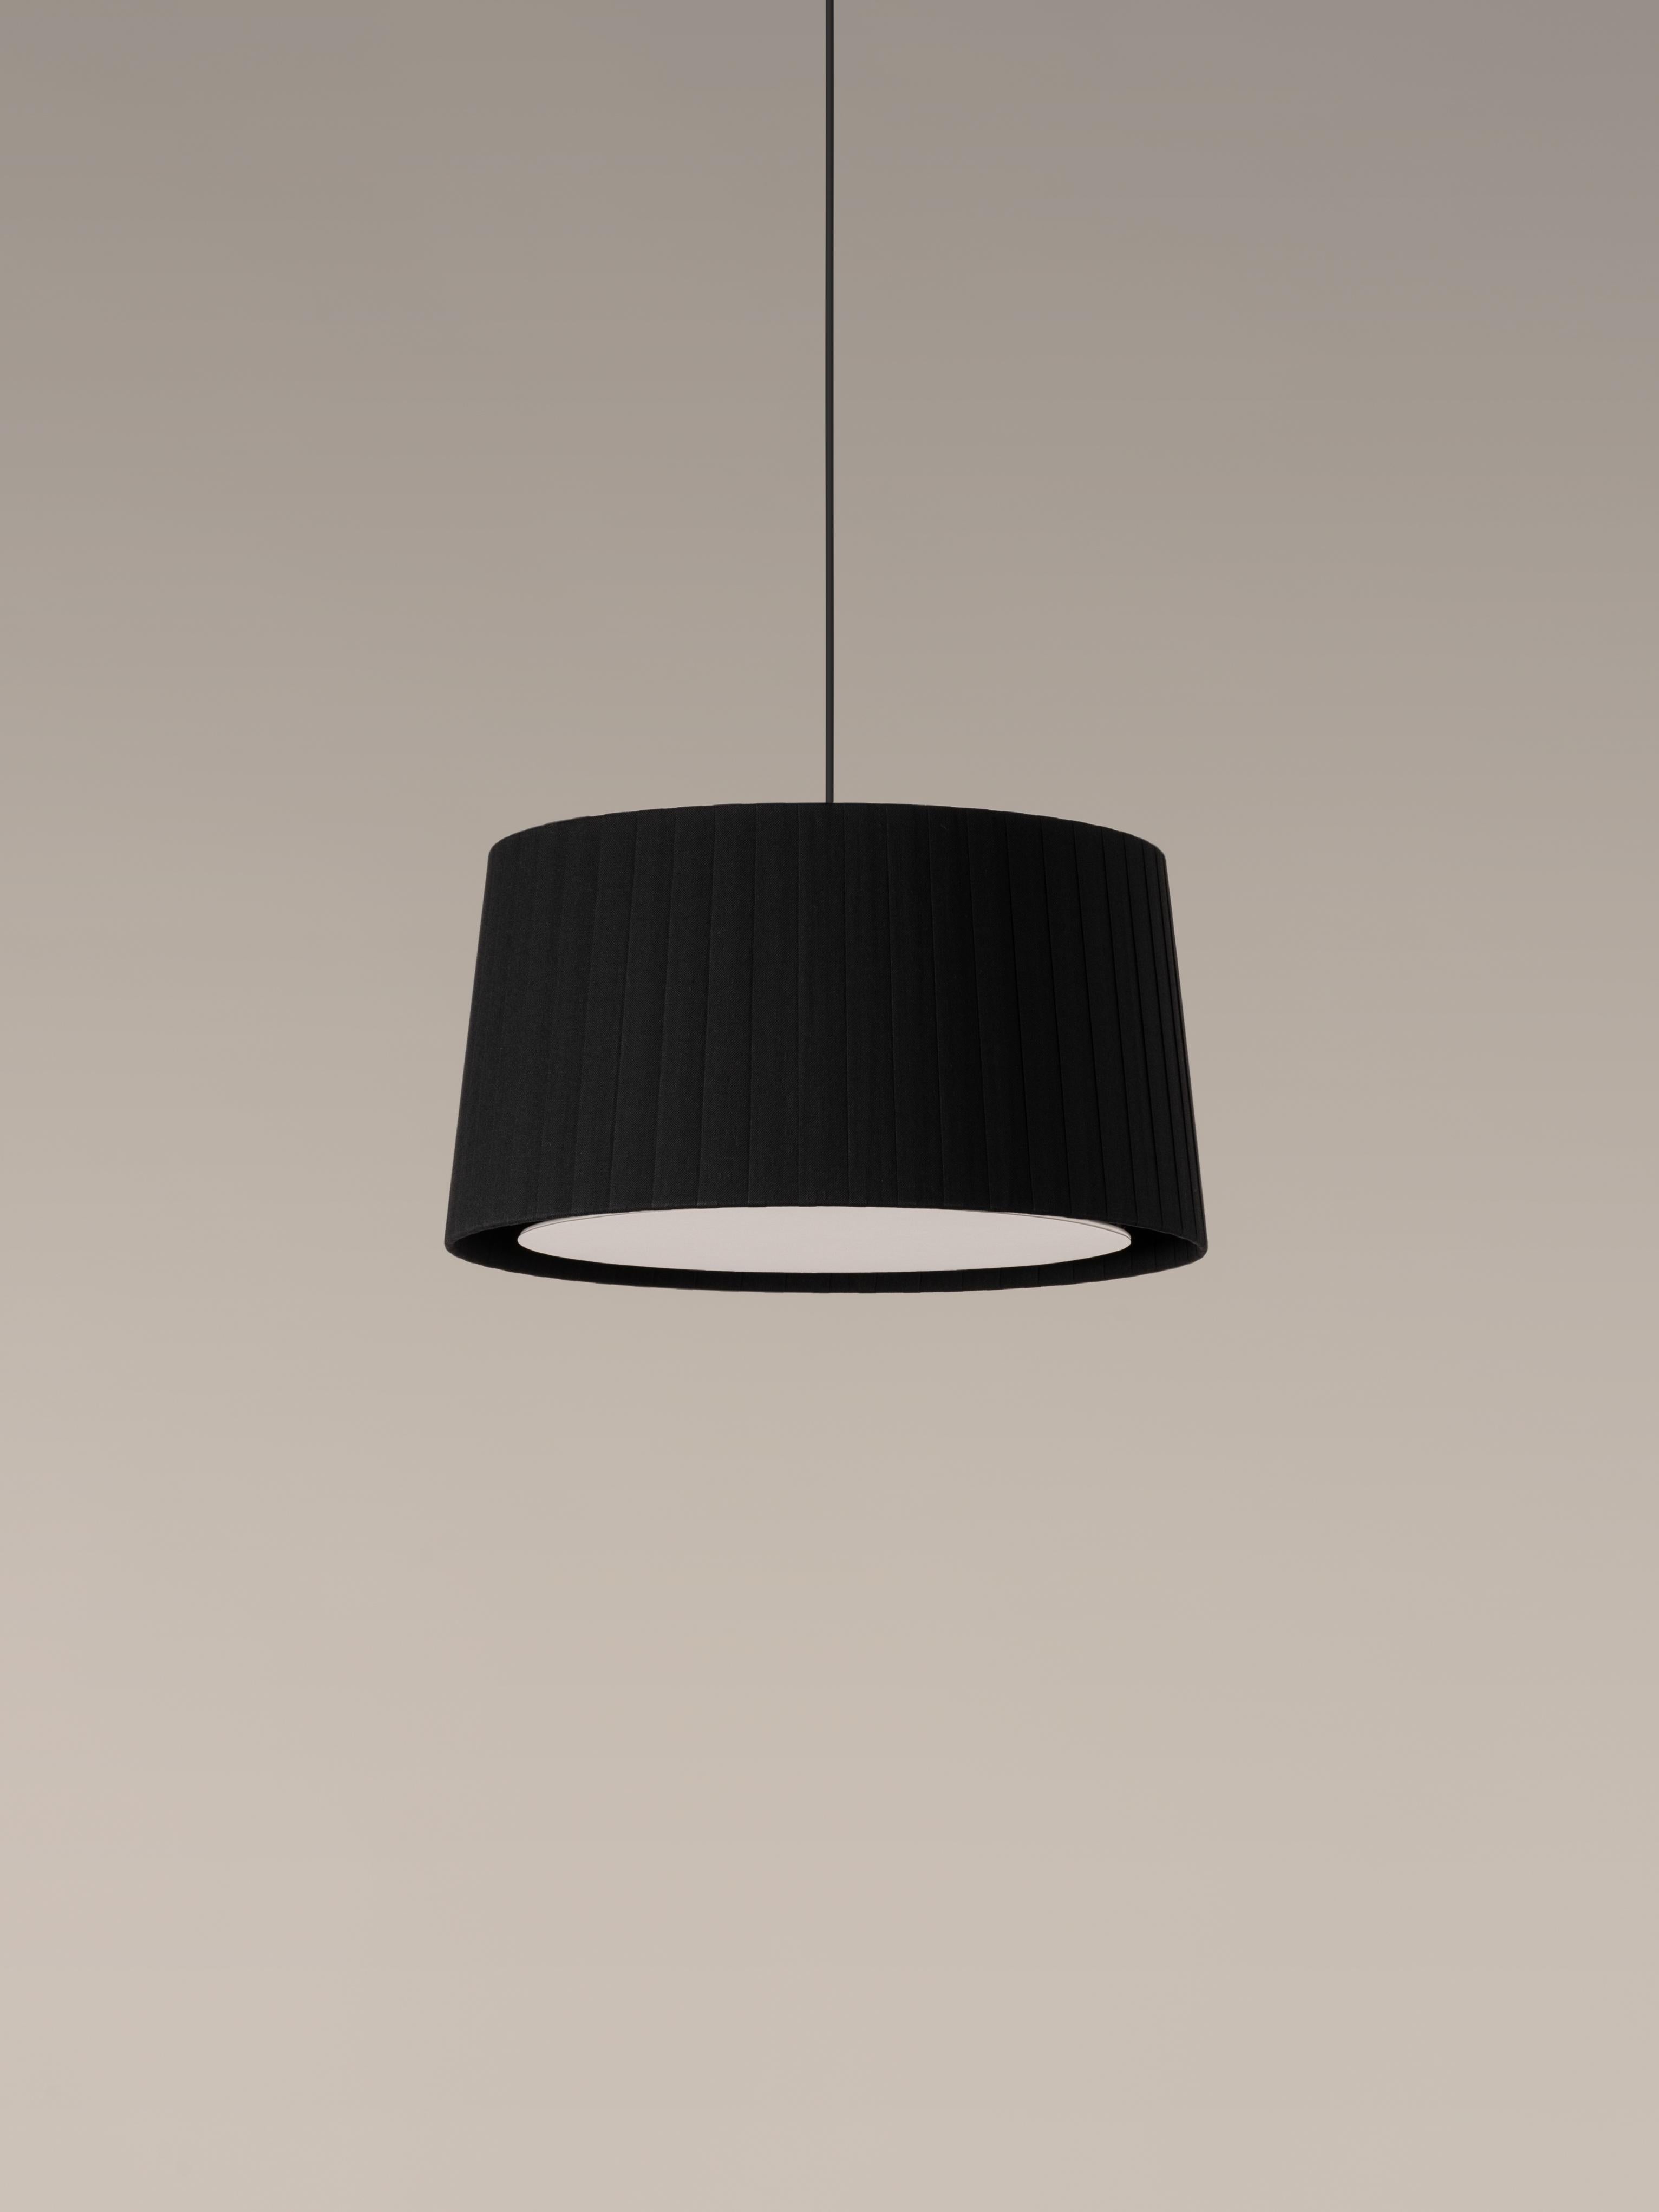 Black GT6 pendant lamp by Santa & Cole
Dimensions: D 45 x H 23 cm
Materials: Metal, ribbon.
Available in other colors. Available in 2 lights version.

Designed for intermediate volumes and household areas, GT5 and GT6 are hanging lamps with